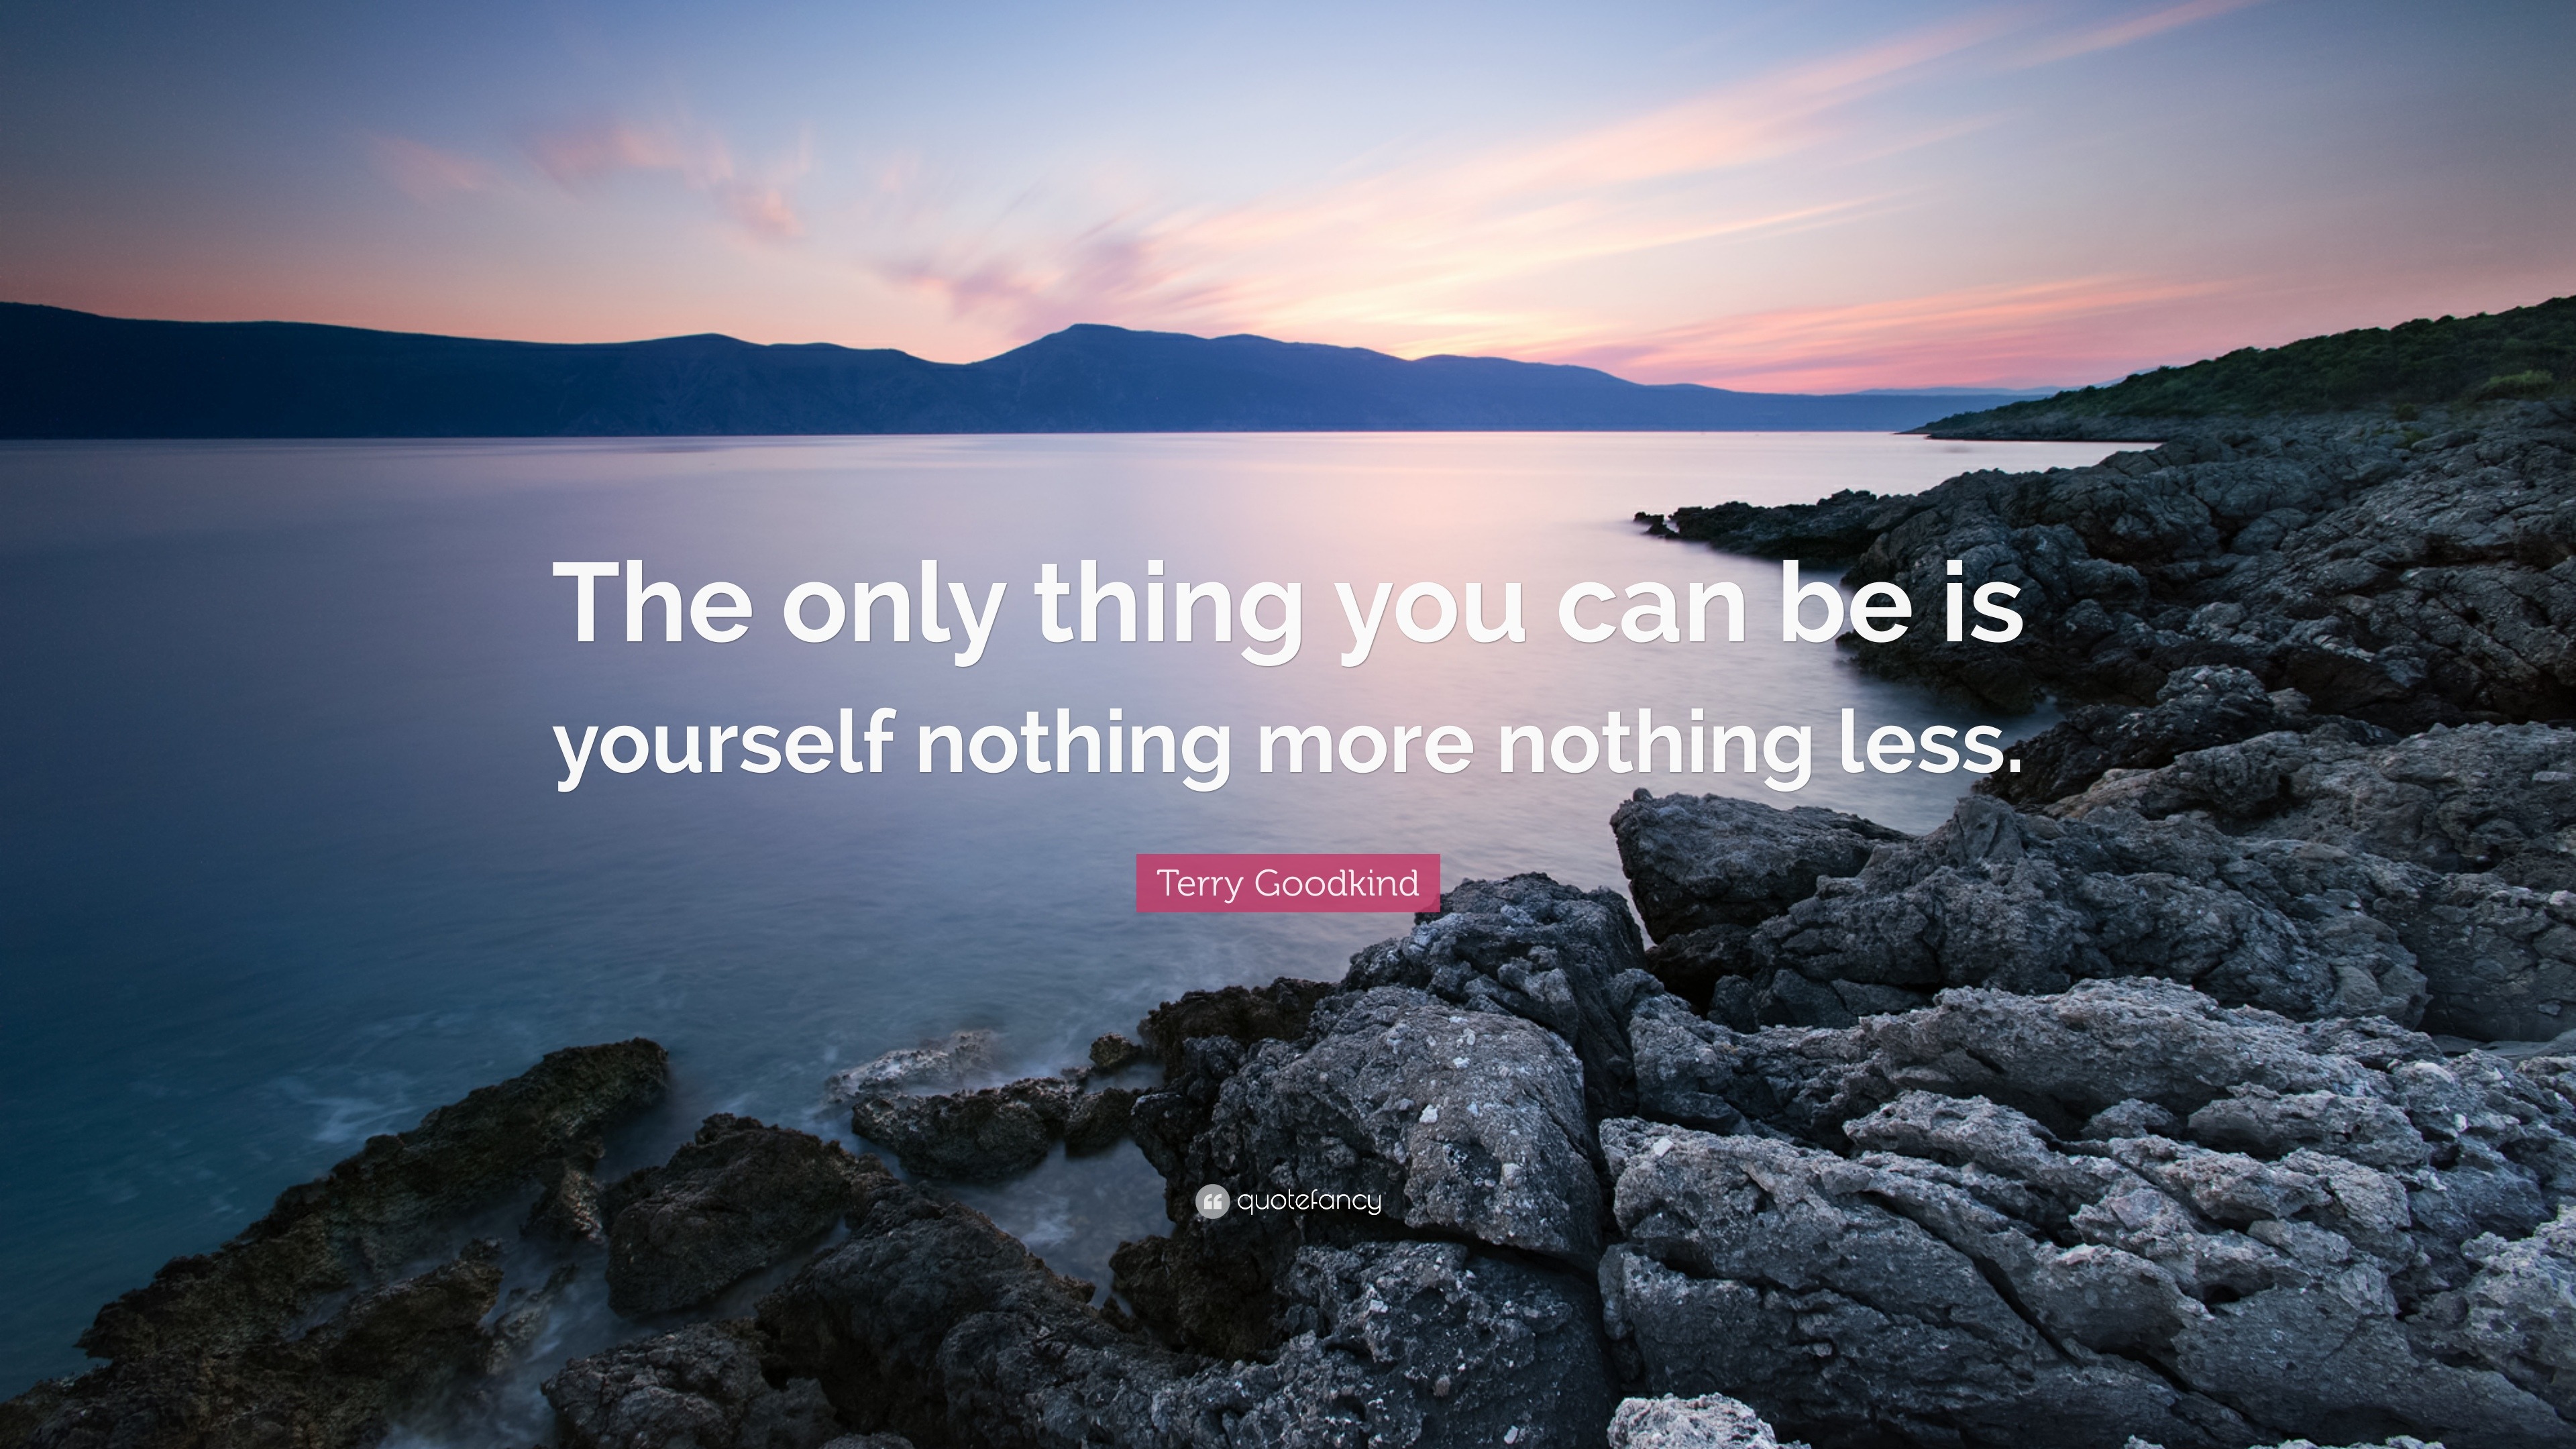 Terry Goodkind Quote: “The only thing you can be is yourself nothing ...